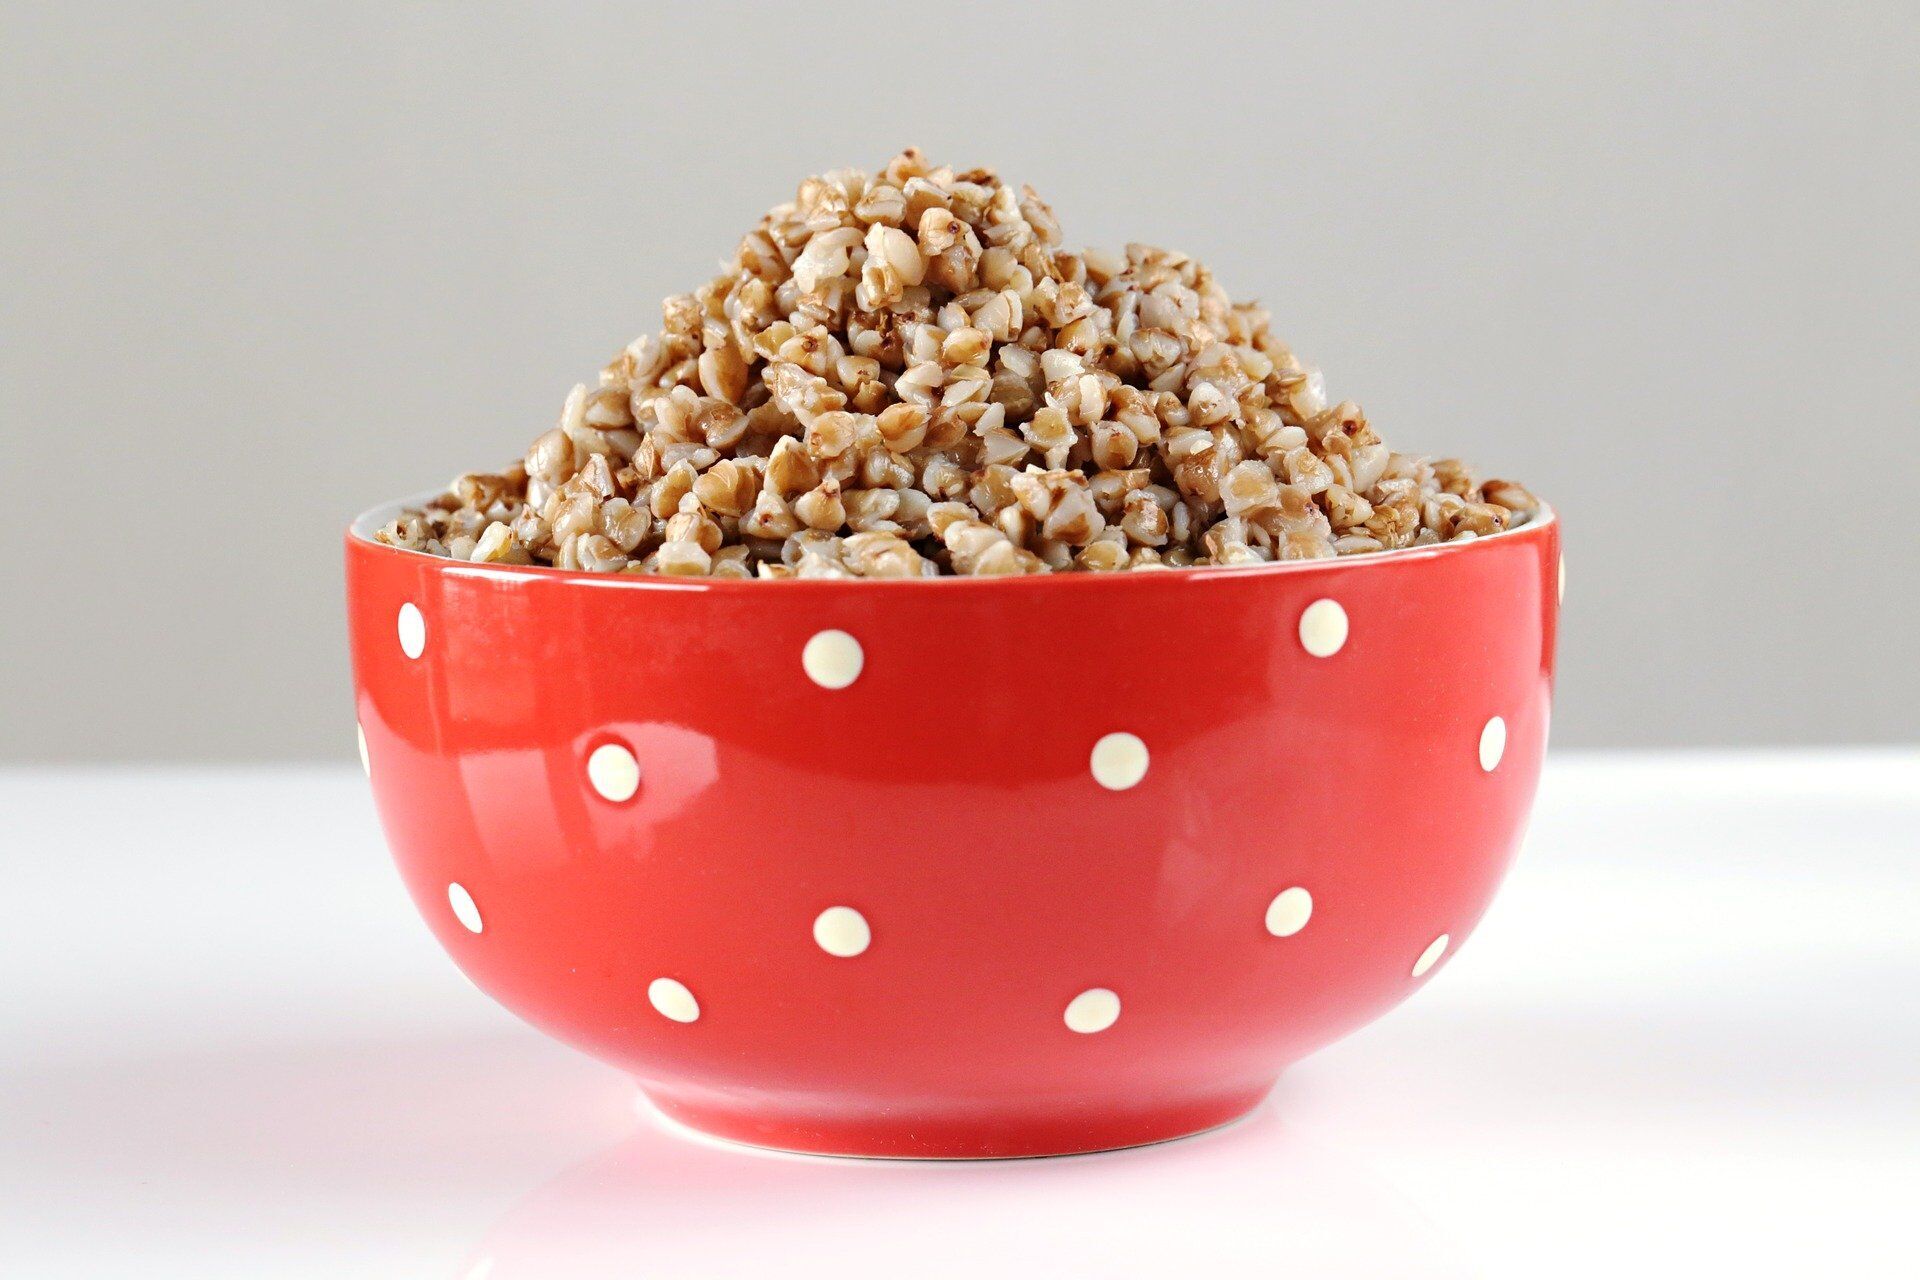 It is best to organize fasting days on buckwheat